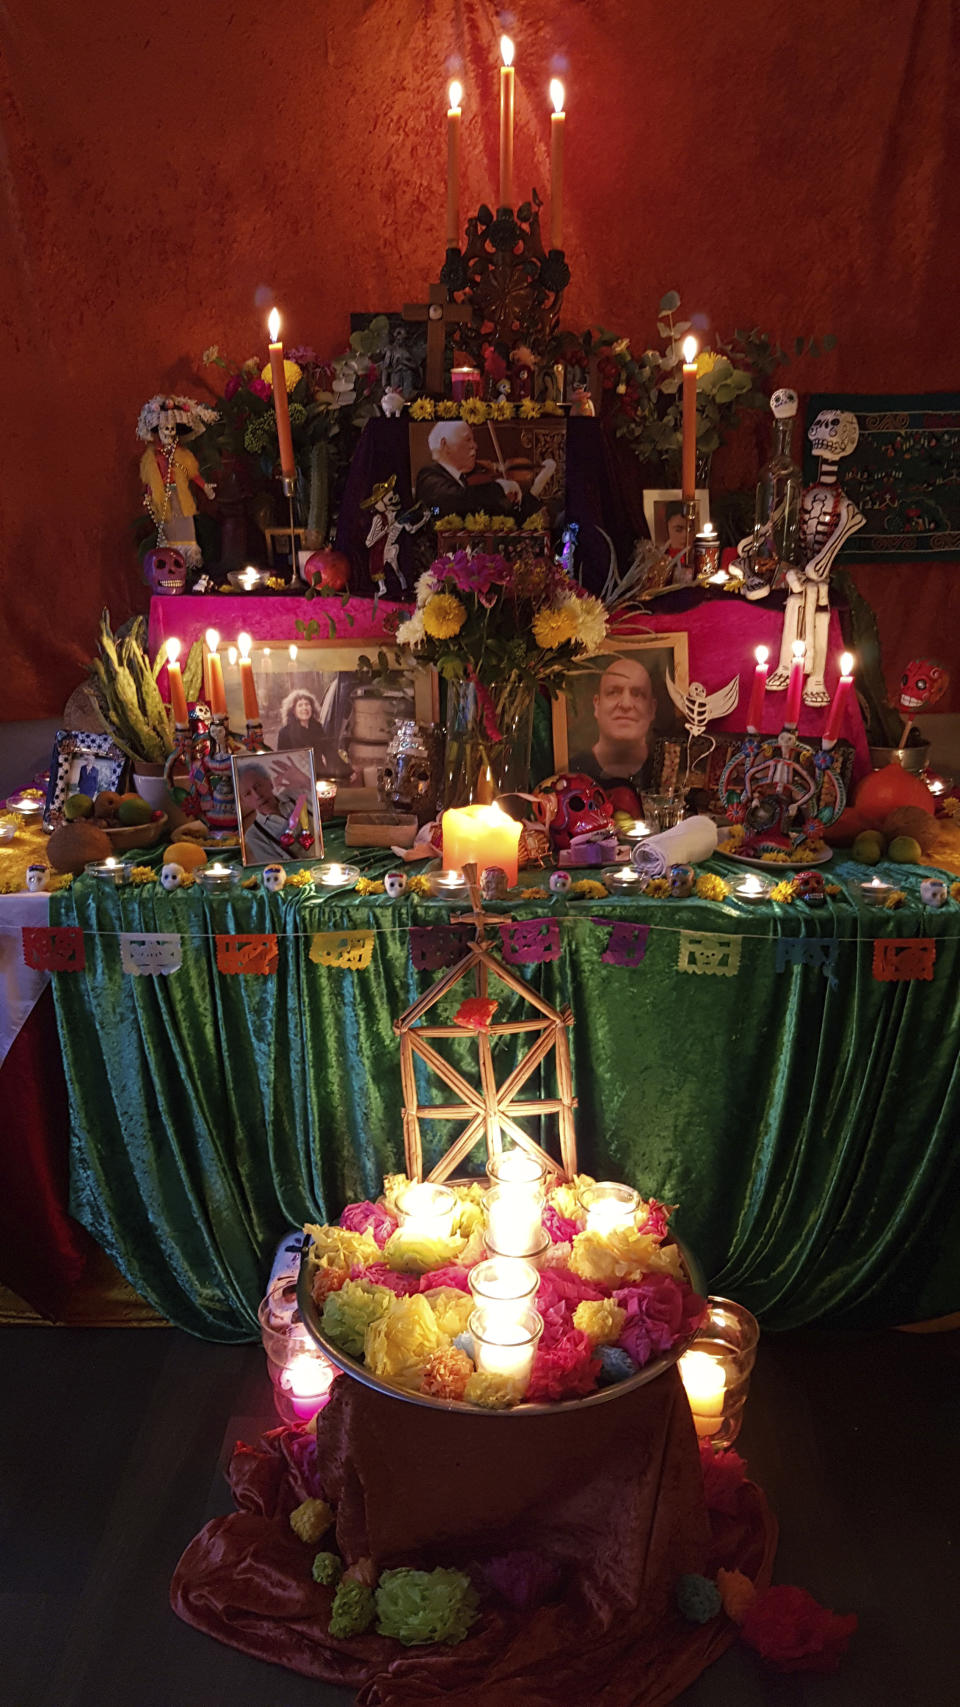 This Nov. 16, 2019 photo shows an altar made by mortician and death cafe host Angela Craig-Fournes in honor of Death Cafe founder Jon Underwood, who died in 2017. (Angela Craig-Fournes via AP)